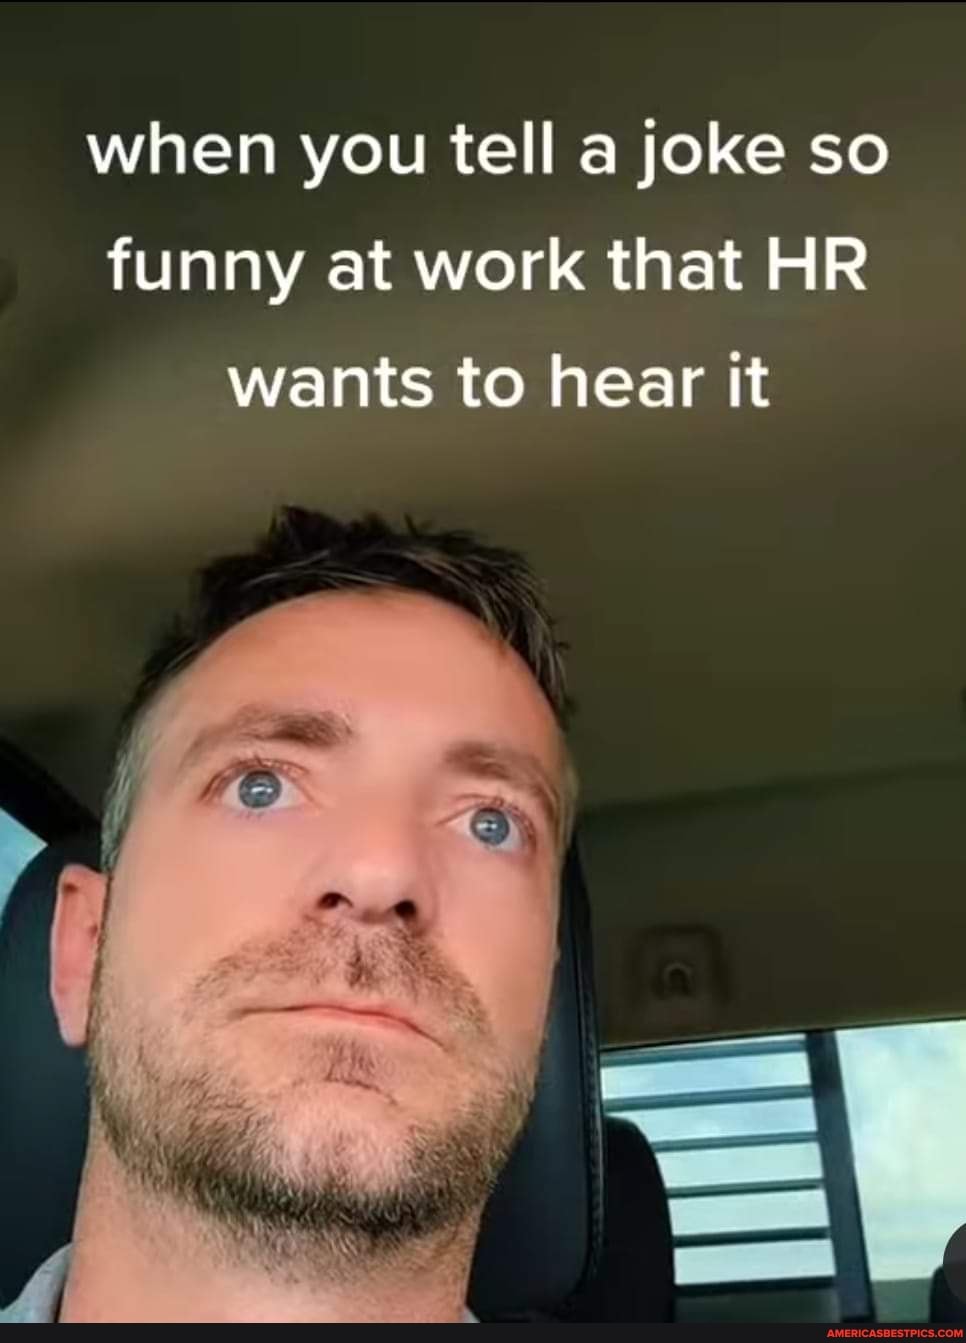 When you tell a joke so funny at work that HR wants to hear it - America's  best pics and videos